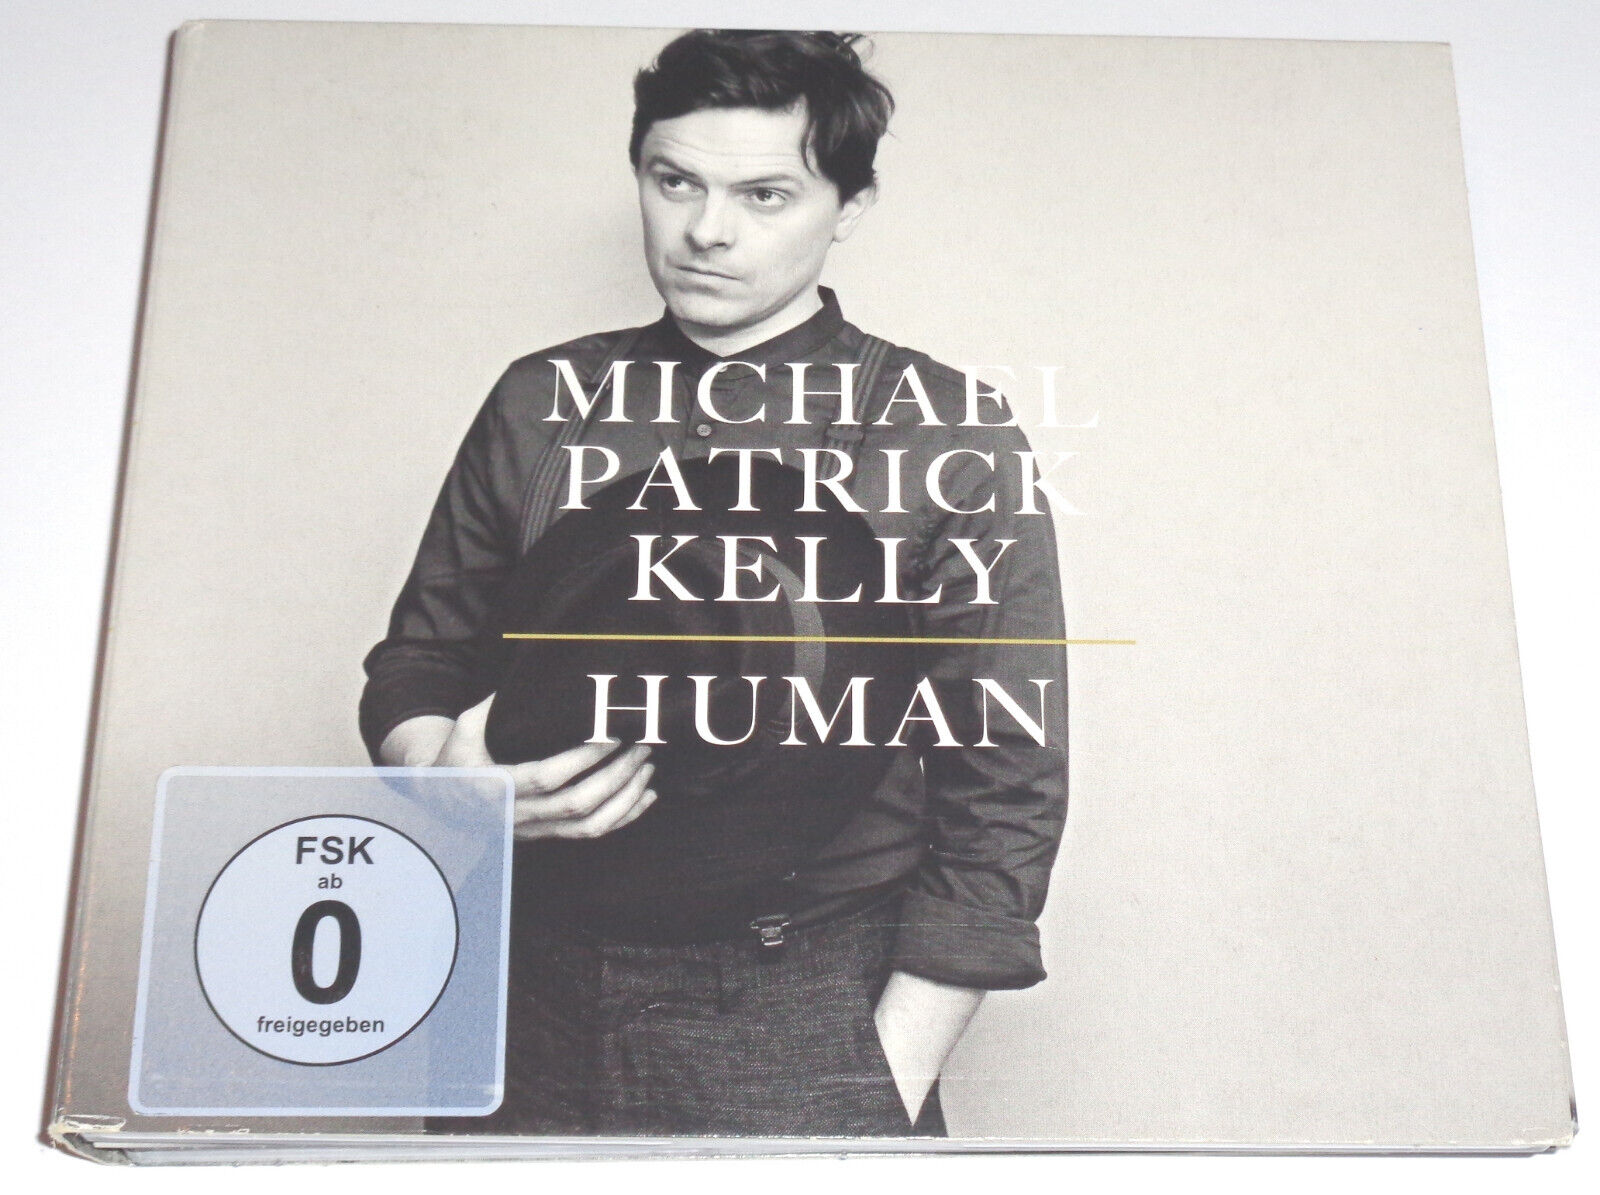 Michael Patrick Kelly Human Rare CD DVD Deluxe Edition 2015 Paddy Kelly Family